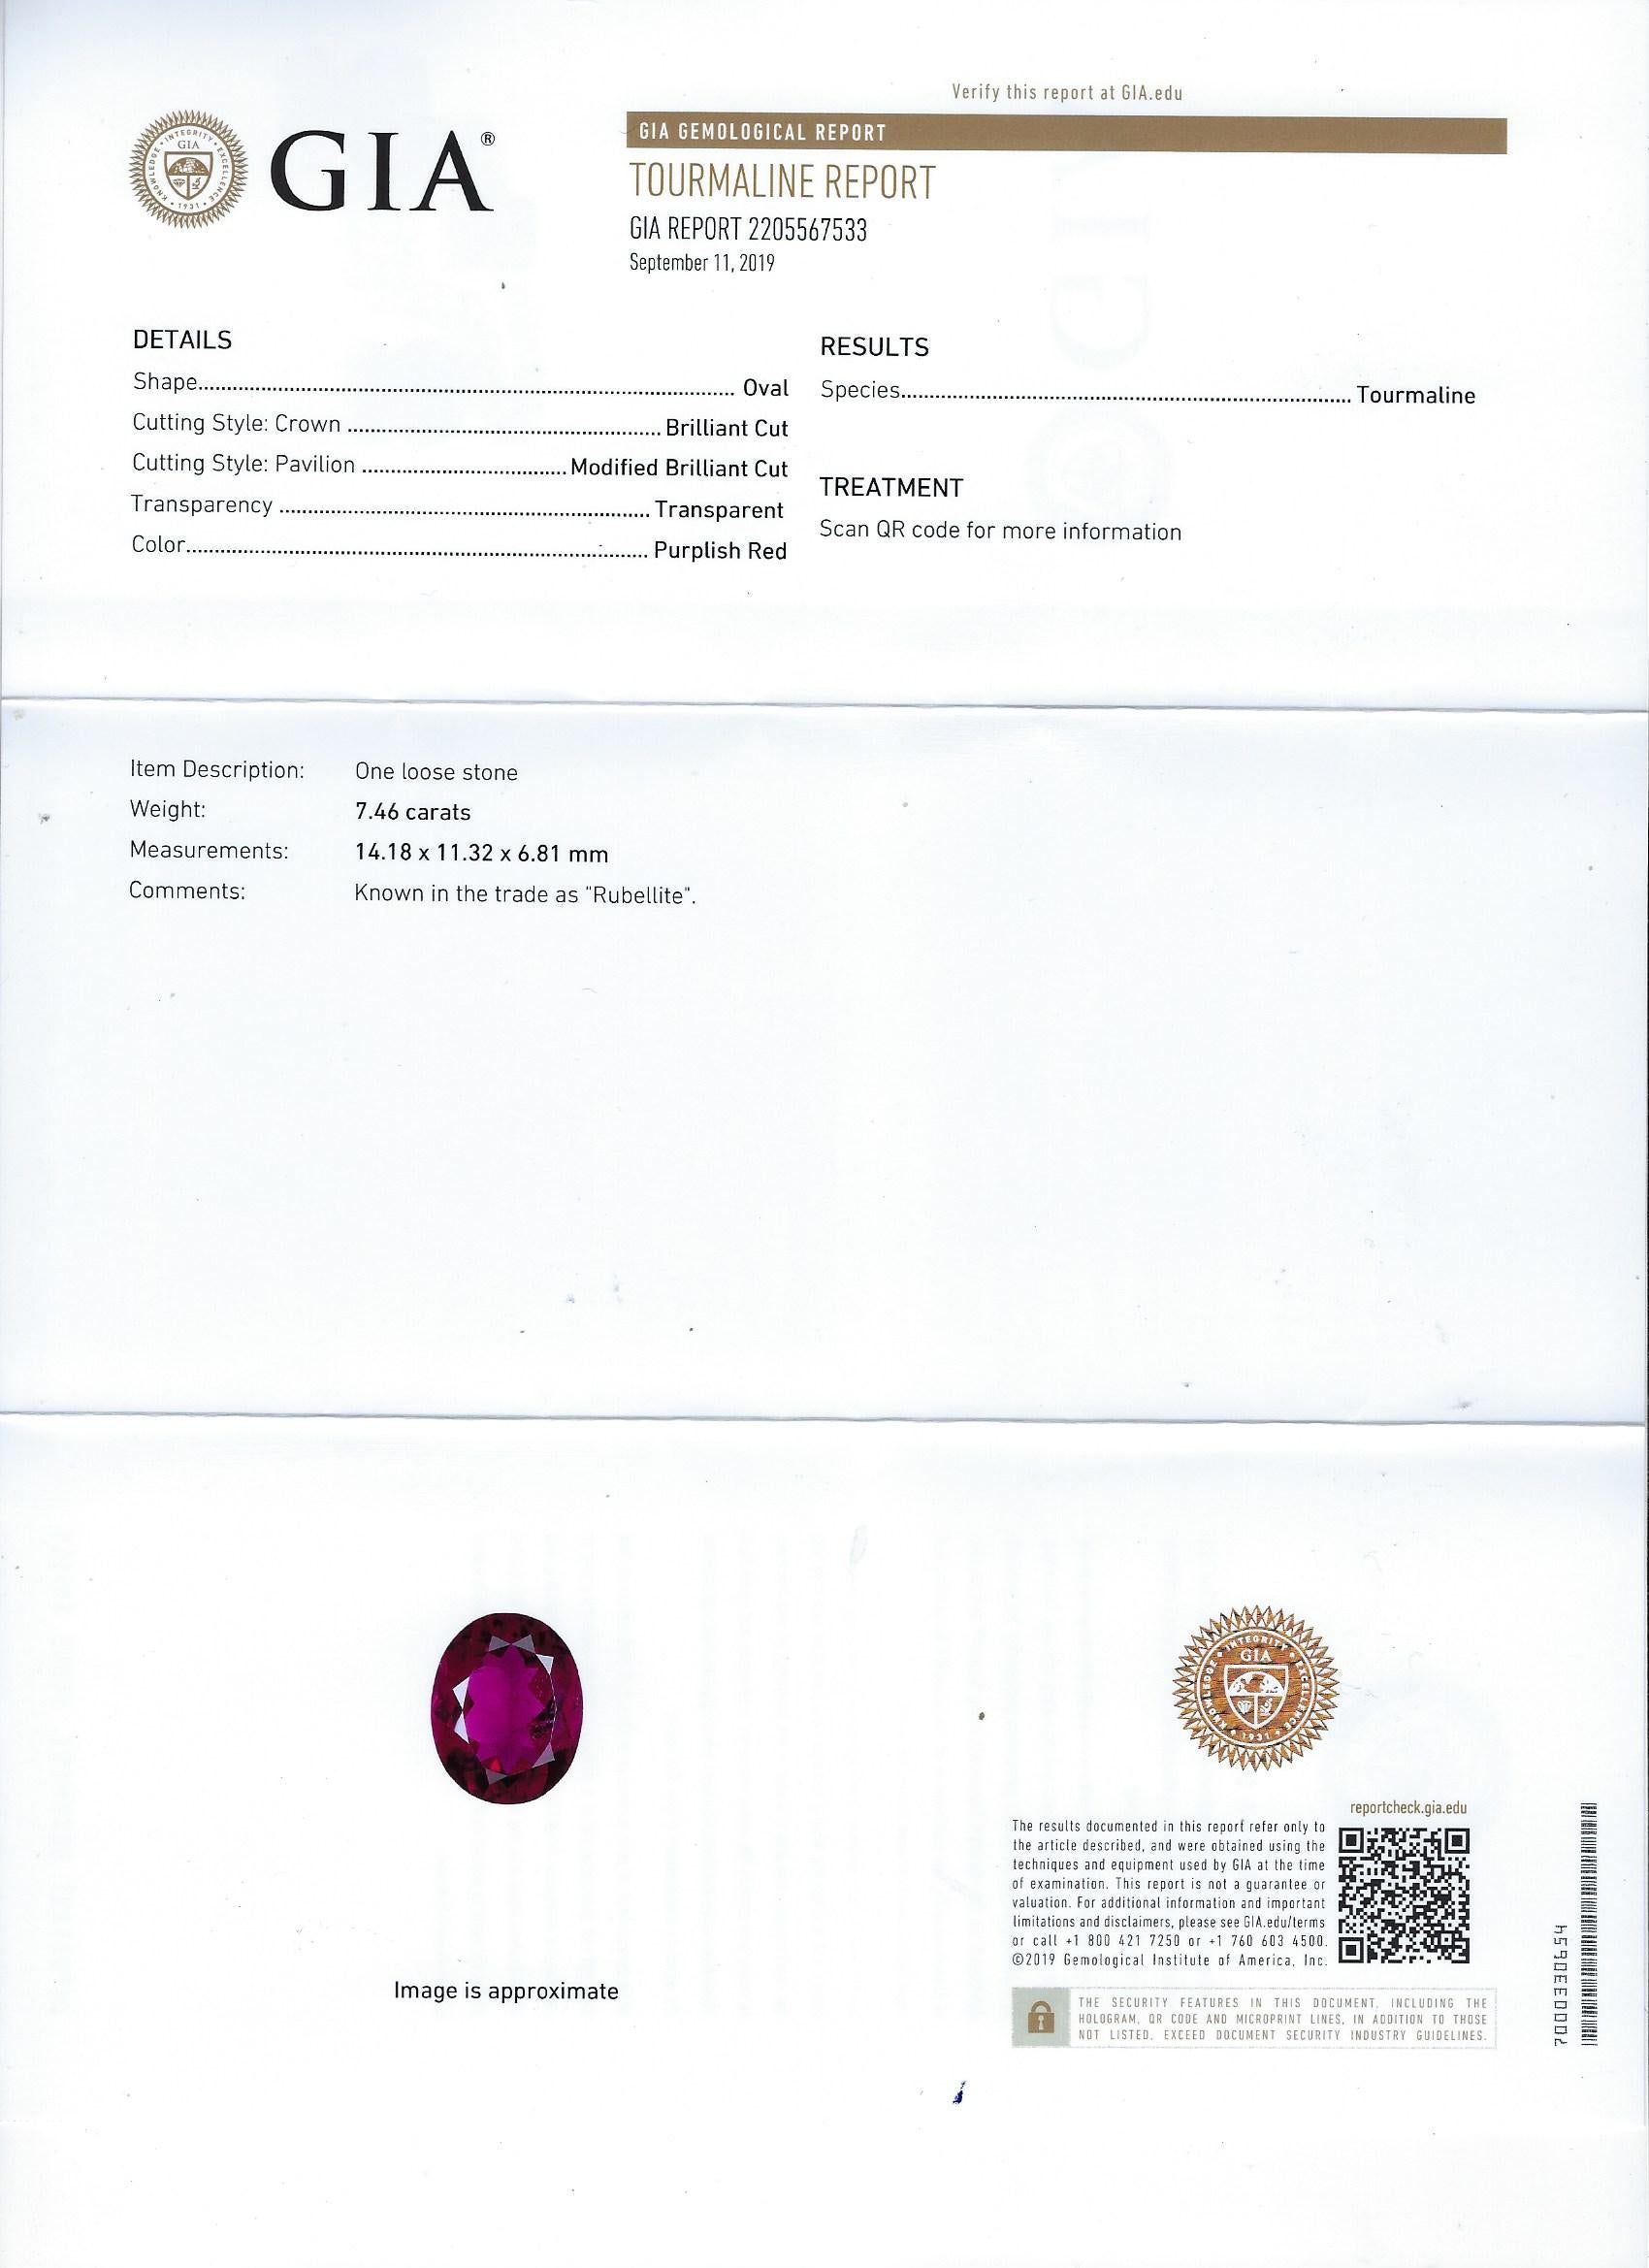 GIA Certified, Awesome 7.46 Kt Natural Oval Cut Red Tourmaline(Rubelite) in a Sumptuos 0.92Kt(F-G, Vvs1) Top Quality White Diamond, 0.52Kt Ruby 18Kt White Gold Setting.
Us size 6 
French size 52
In our Smart Dark Brown Suede Leather Box
We offer